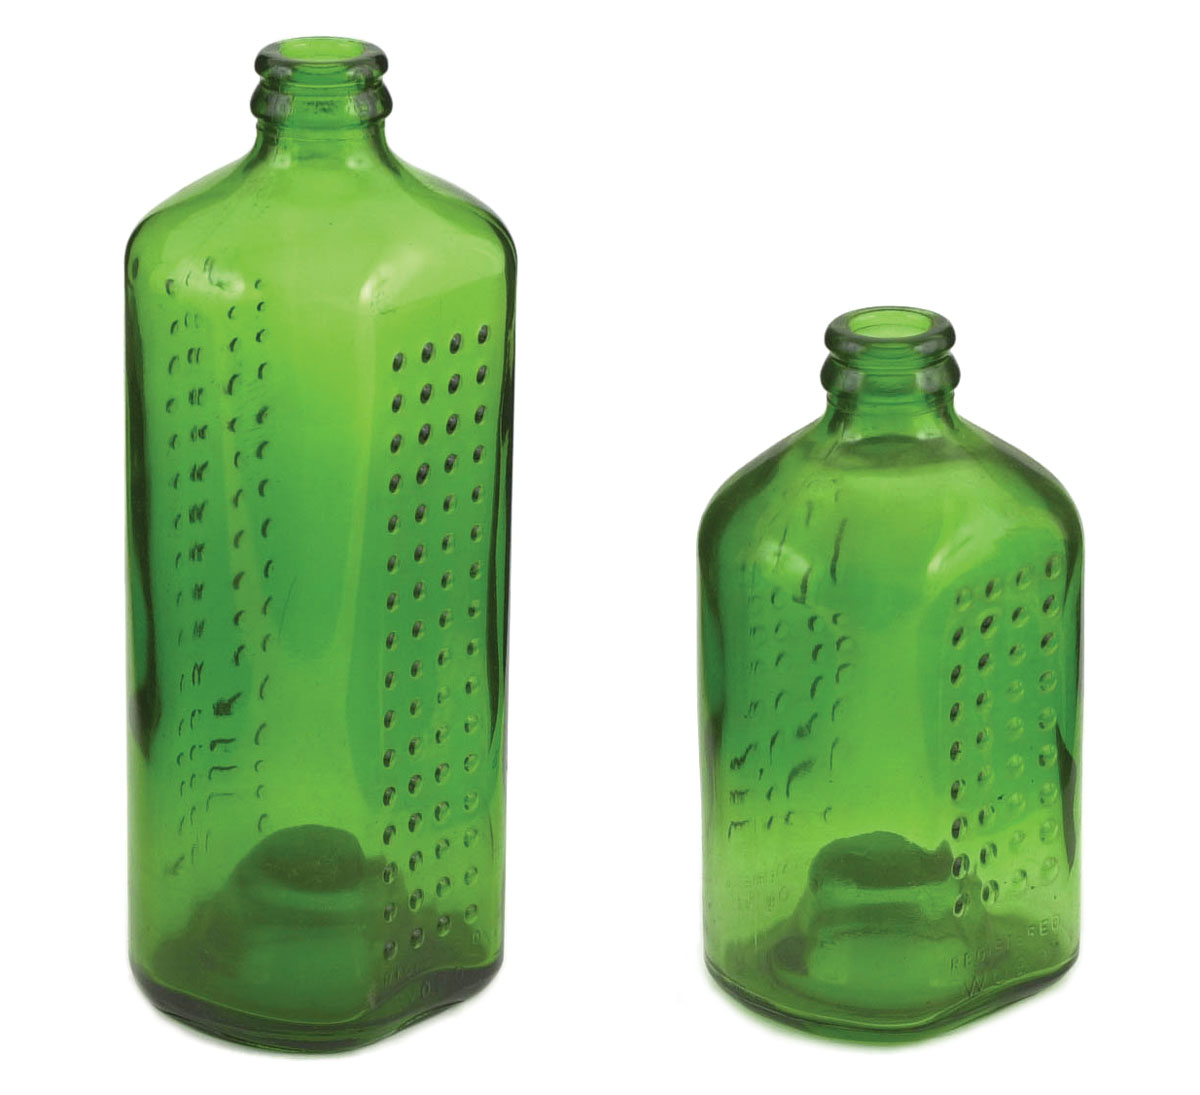 A photograph of a large and a small green glass WOBO (World Bottles), designed by John Habraken for Heineken.